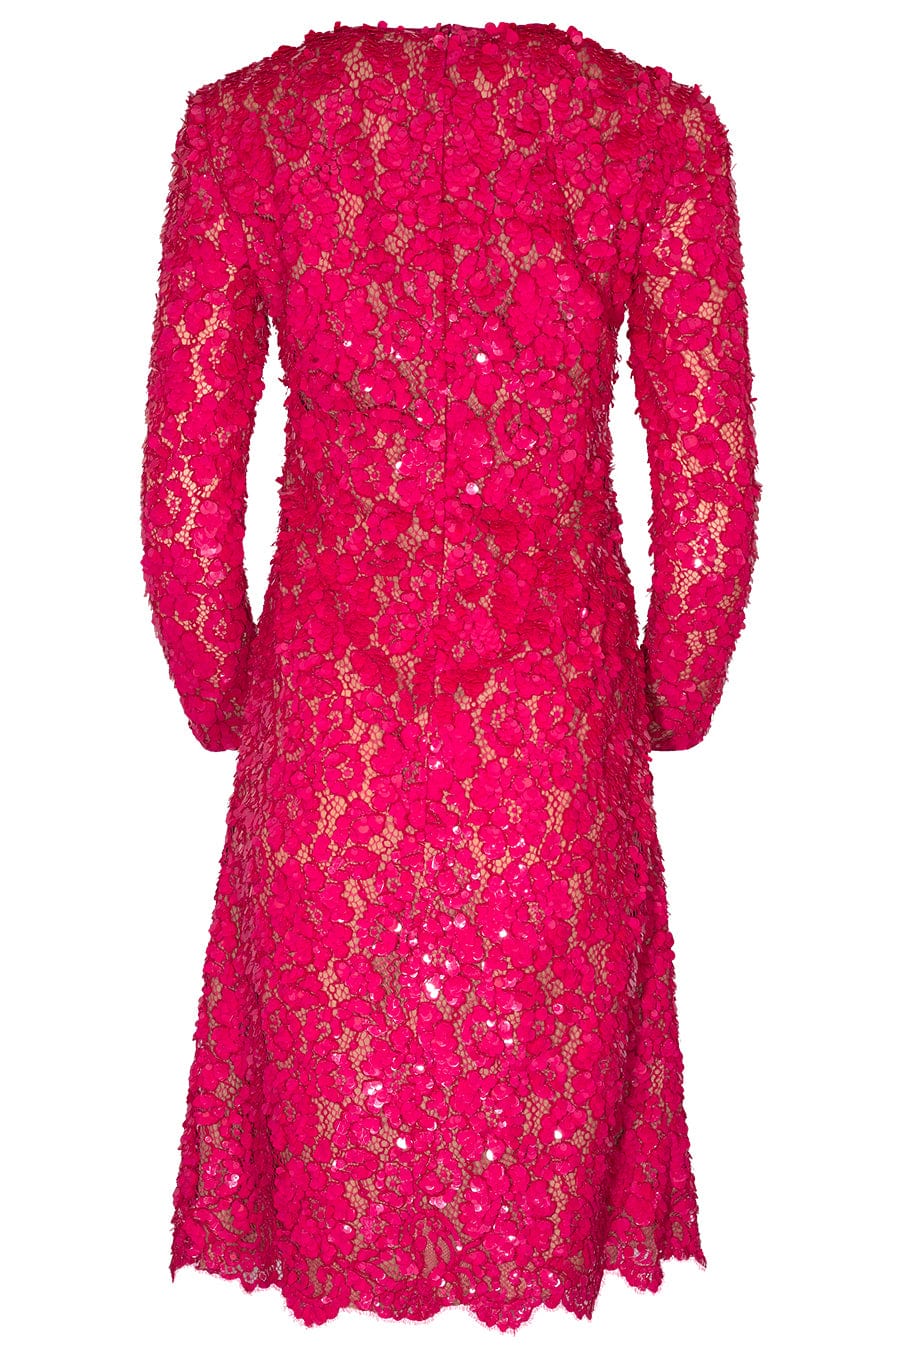 MICHAEL KORS COLLECTION-Paillette Hand Embroidered Dress-